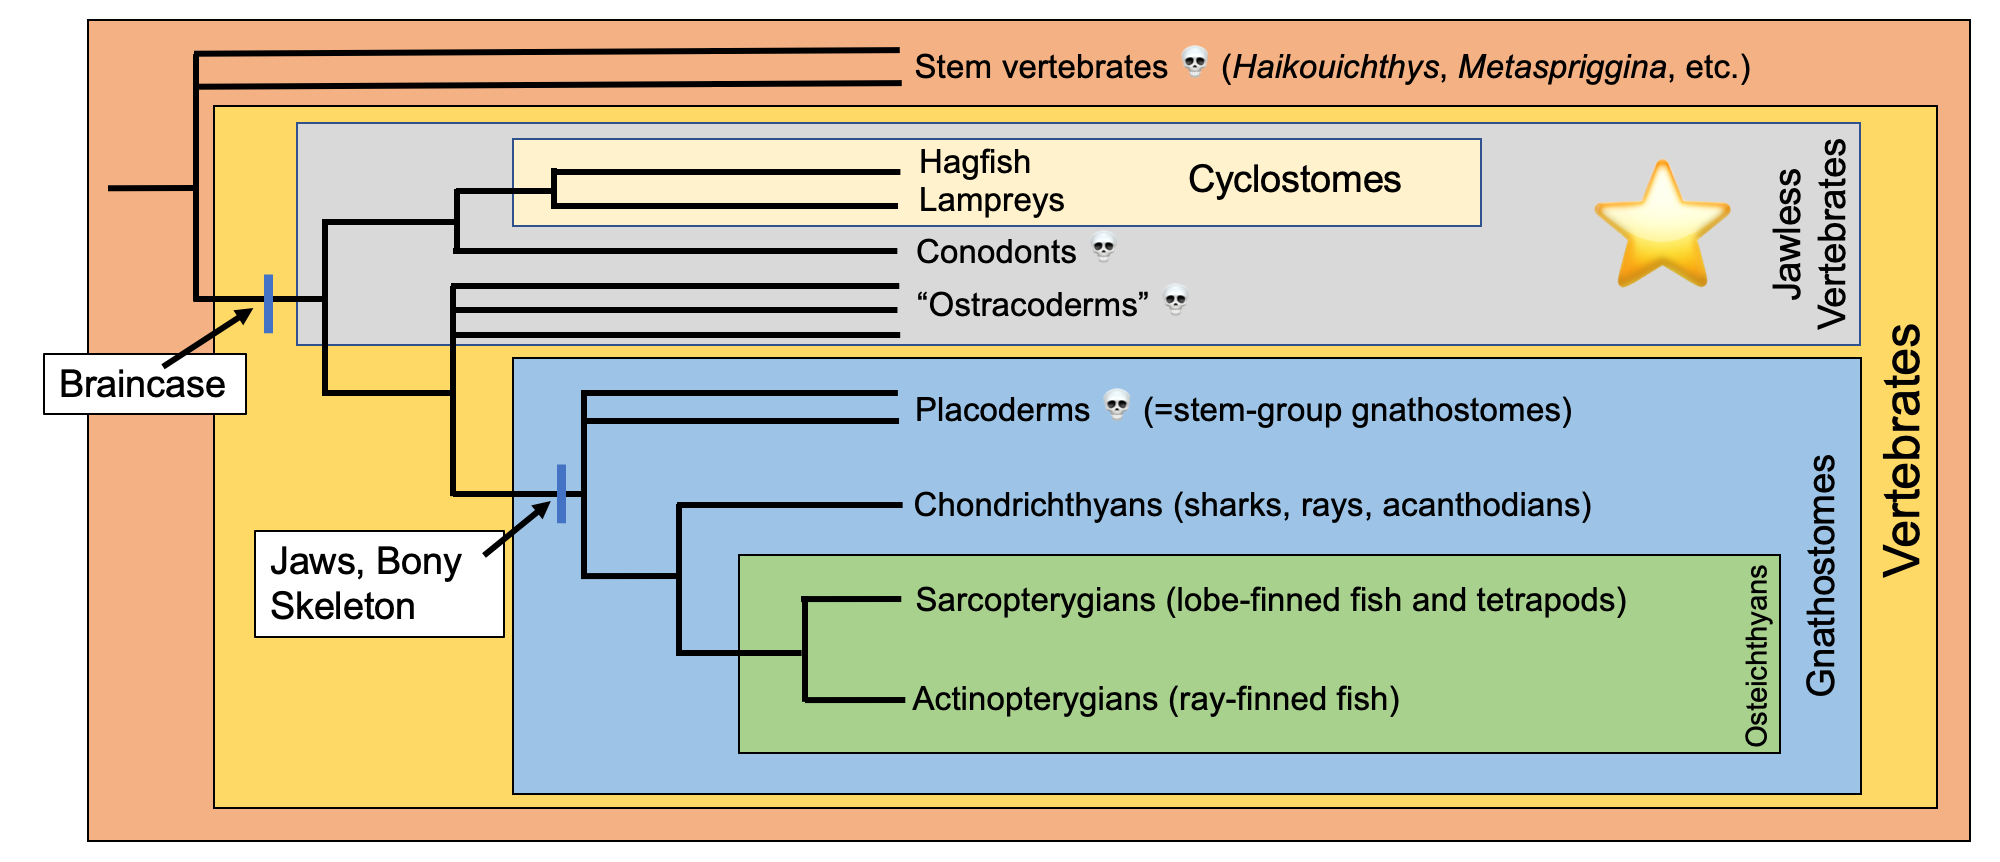 Image showing a simplified overview of vertebrate phylogeny.